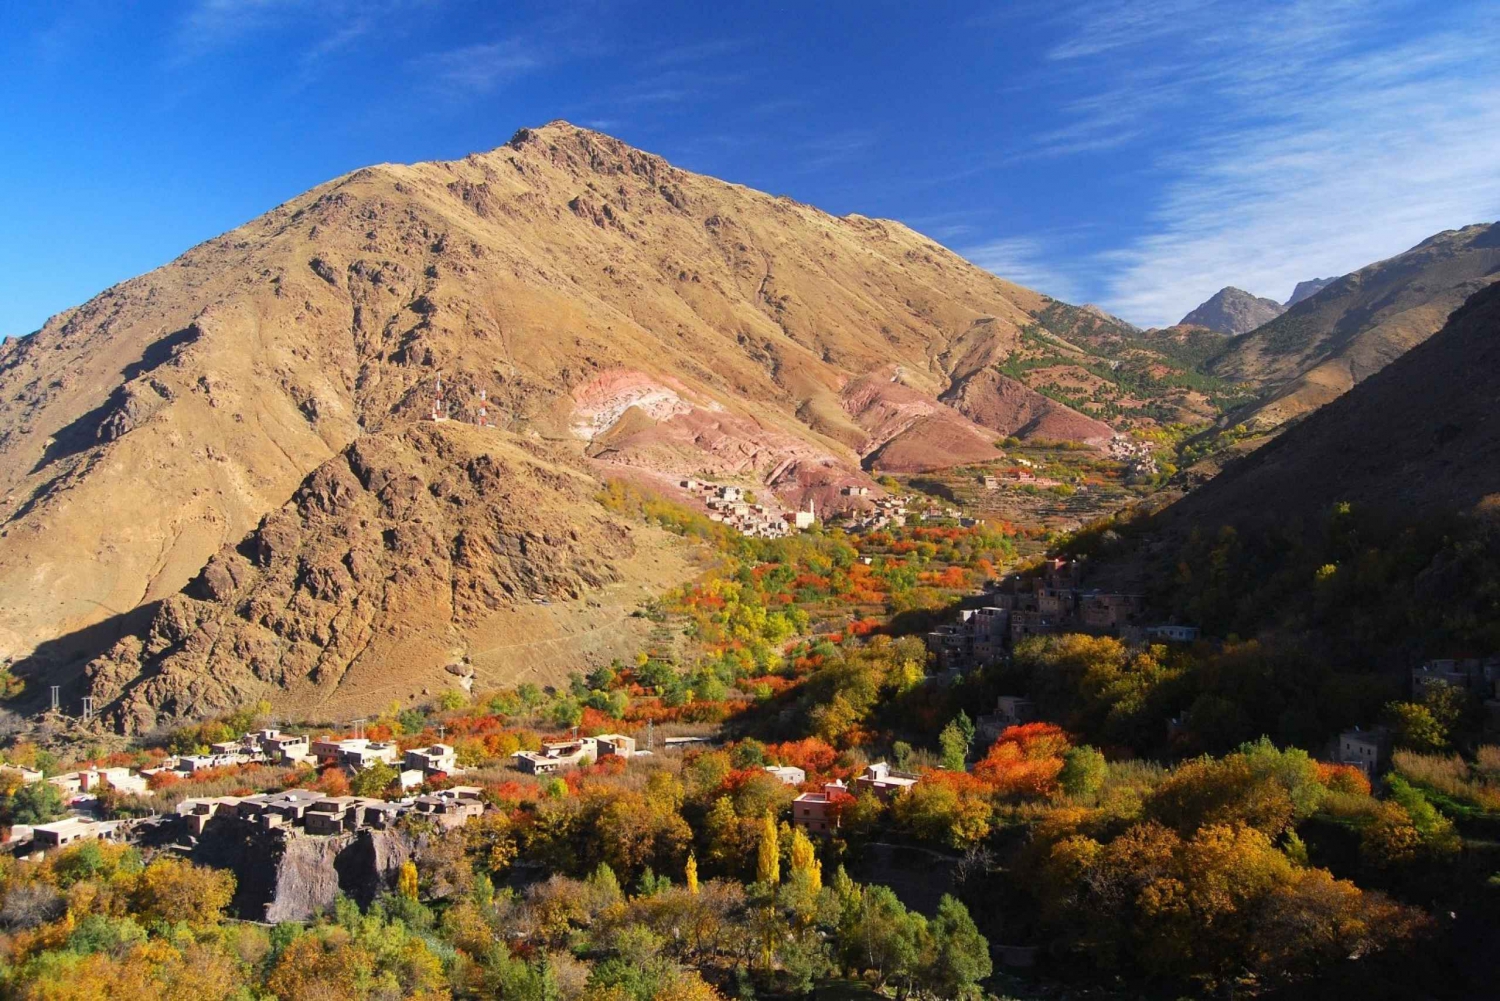 Atlas Mountains hiking day trip from Marrakech All Included